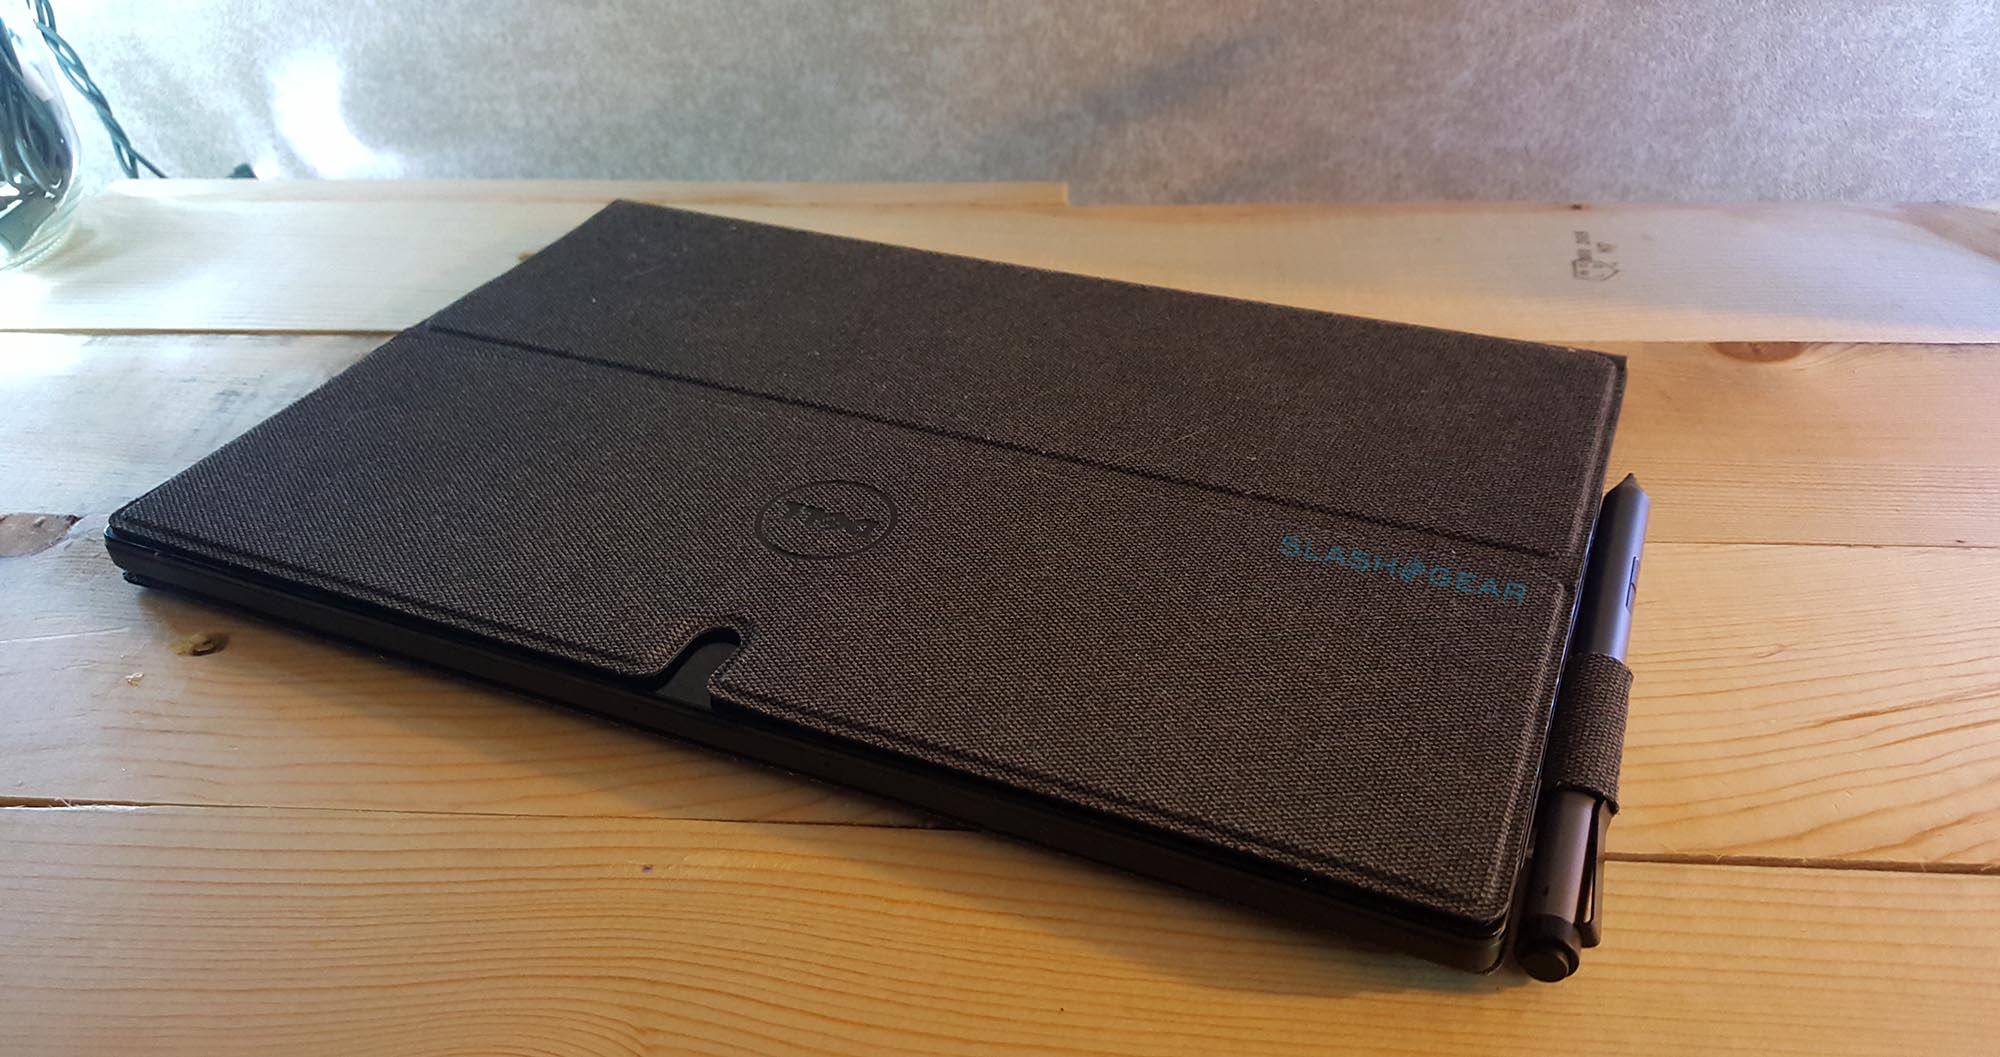 Dell XPS 12 Two-in-One Laptop Review - SlashGear